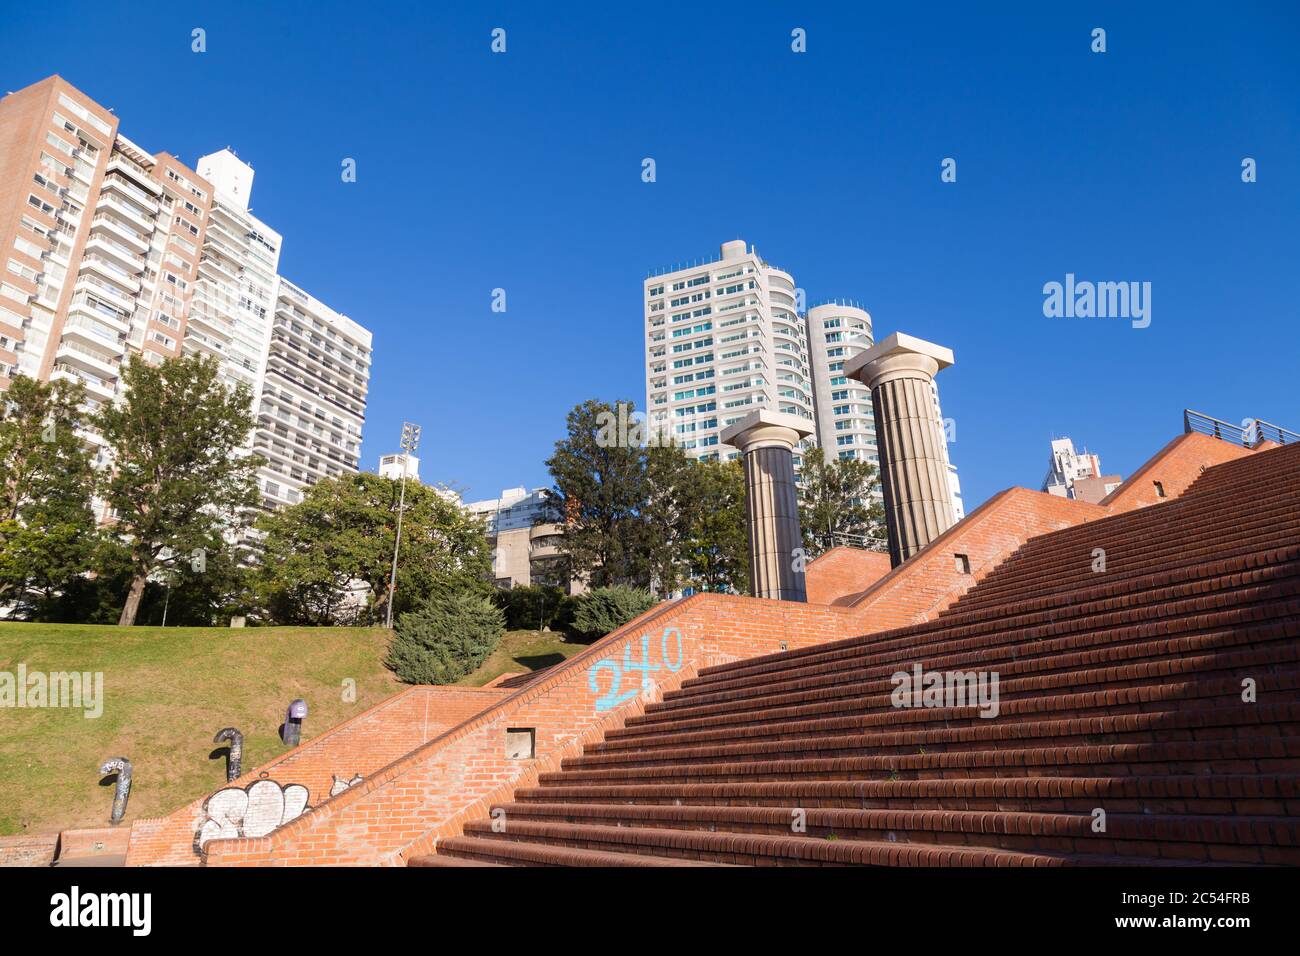 ROSARIO, ARGENTINA - JULY 6, 2019: Spain Park placed at the coast of Parana river in Rosario. View of the stairs and the columns. Stock Photo